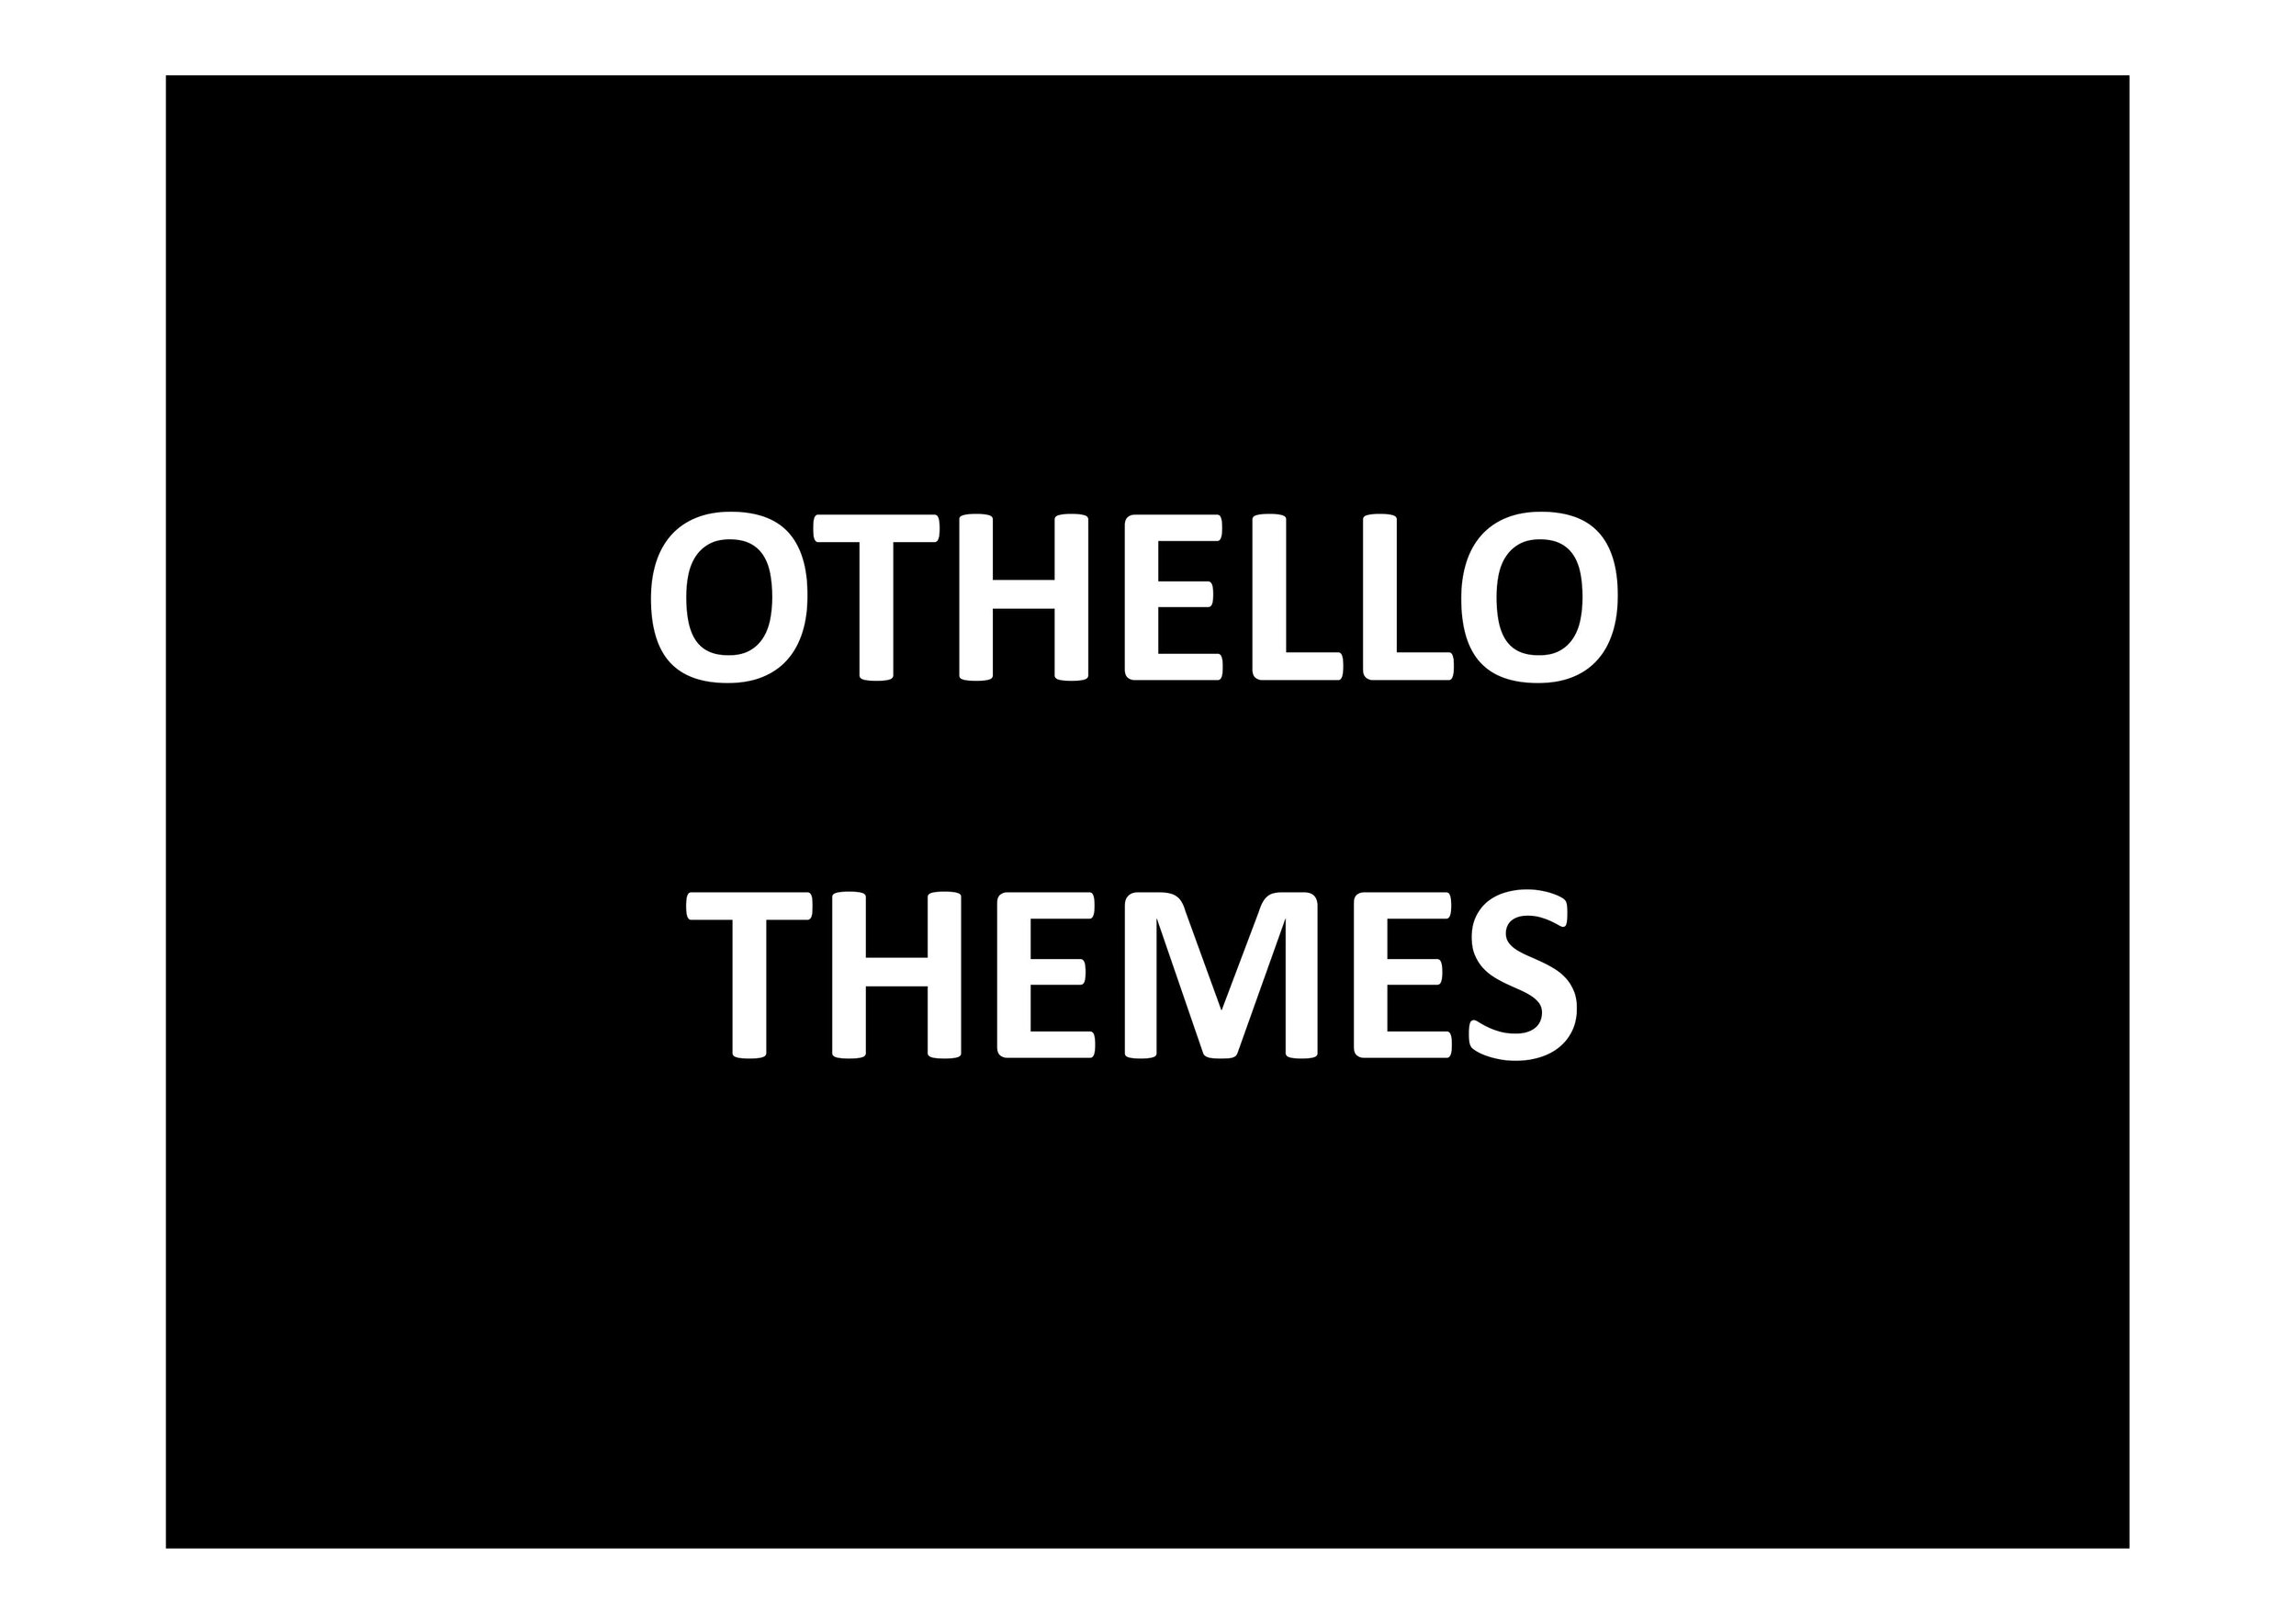  Themes on Othello, looking at news headlines and reading into pictures. 